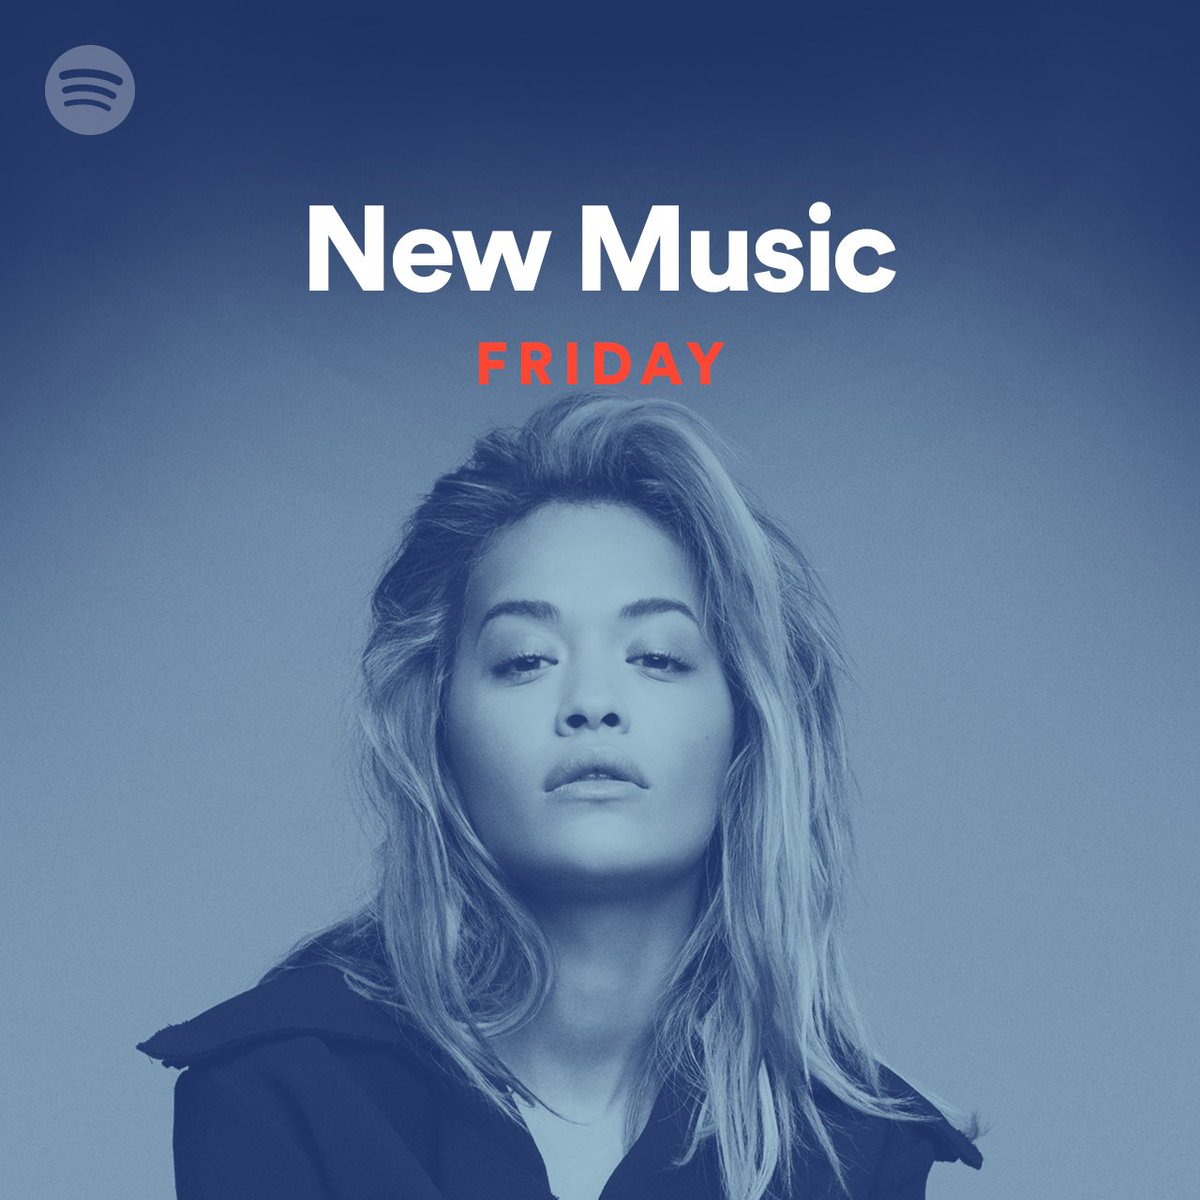 RT @SpotifyUK: It’s #NewMusicFriday and @RitaOra is gracing the cover ???? https://t.co/slrbZxqS0I https://t.co/BsJ7bdaIXb